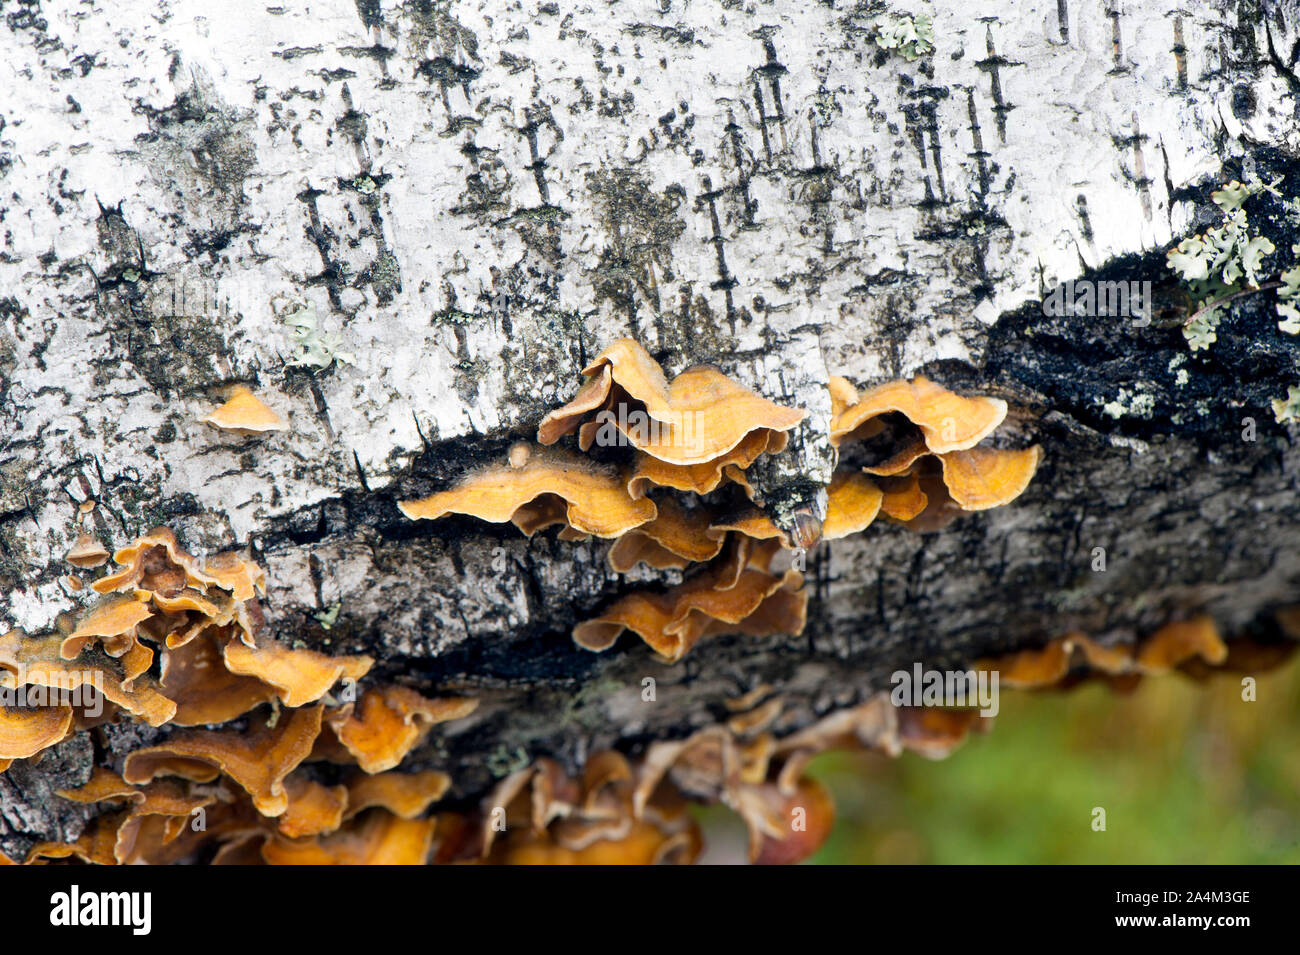 Mushrooms Growing On Tree Bark, Aust Agder Forest, Norway Stock Photo